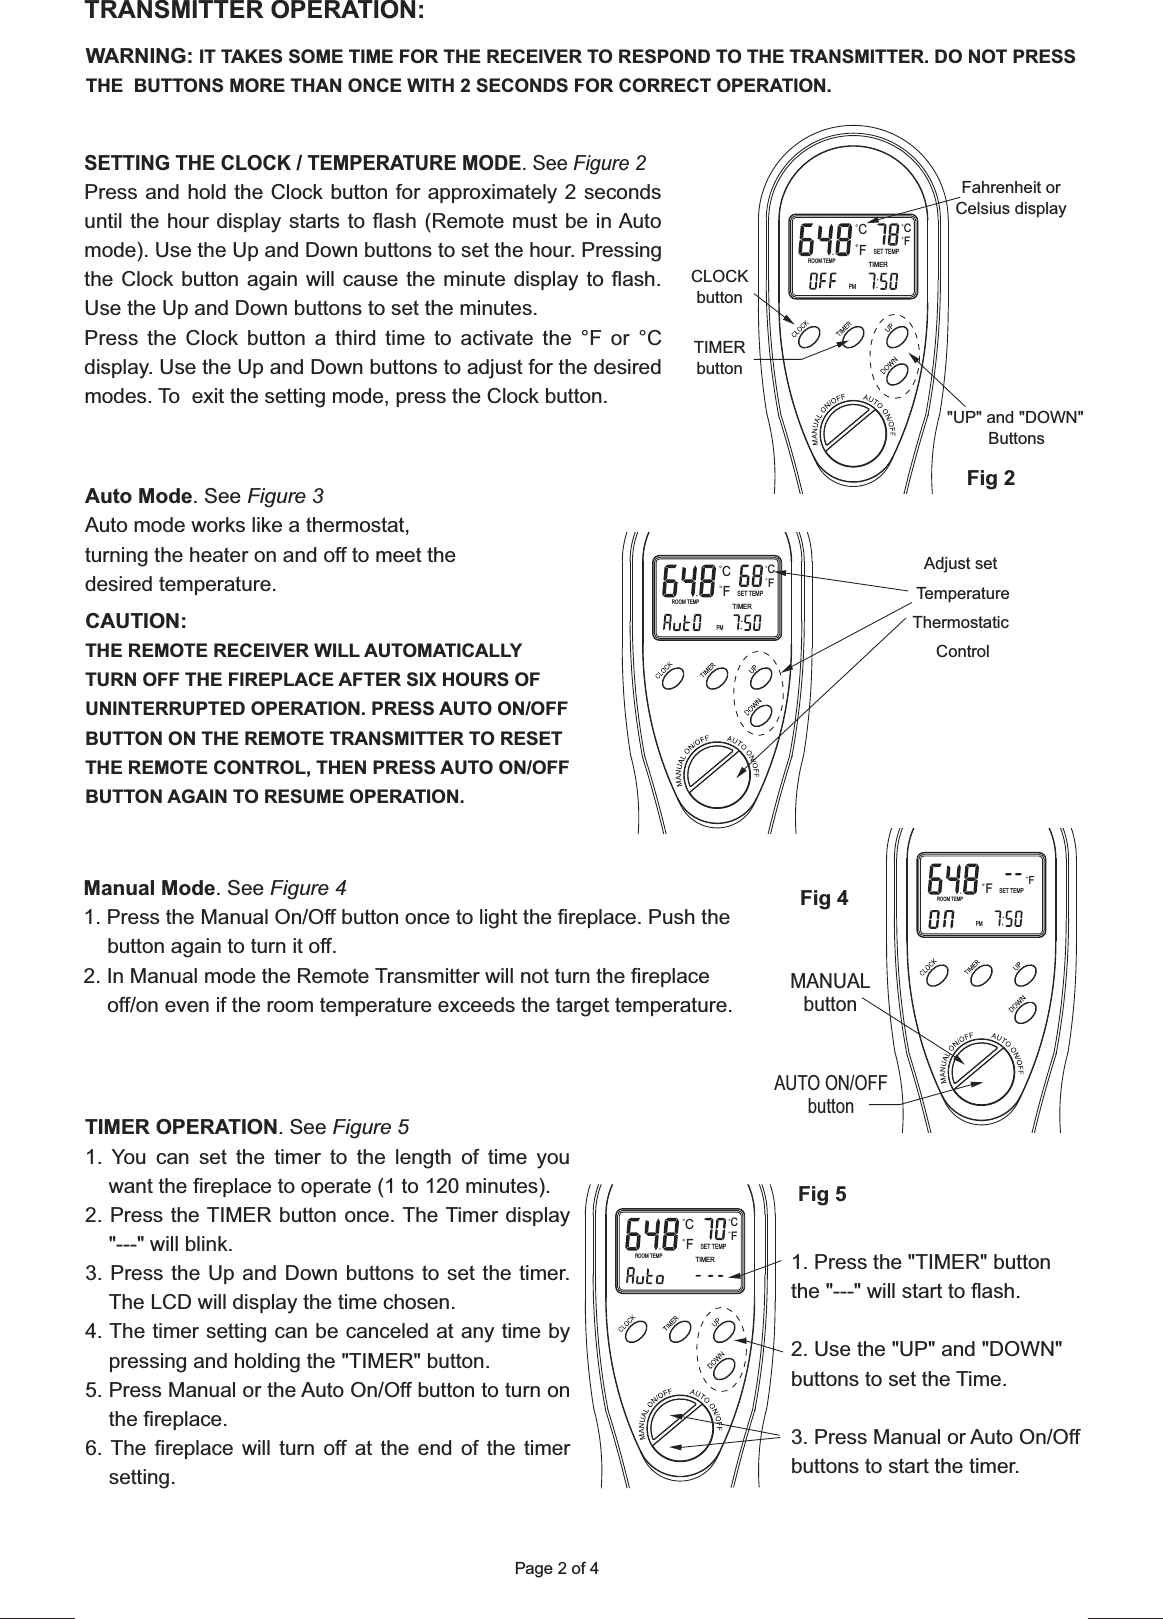 Page 2 of 4SETTING THE CLOCK / TEMPERATURE MODE. See Figure 2Press and hold the Clock button for approximately 2 seconds until the hour display starts to flash (Remote must be in Auto mode). Use the Up and Down buttons to set the hour. Pressing the Clock button again will cause the minute display to flash. Use the Up and Down buttons to set the minutes.Press the Clock button a third time to activate the °F or °C display. Use the Up and Down buttons to adjust for the desired modes. To  exit the setting mode, press the Clock button.TRANSMITTER OPERATION:WARNING: IT TAKES SOME TIME FOR THE RECEIVER TO RESPOND TO THE TRANSMITTER. DO NOT PRESS THE  BUTTONS MORE THAN ONCE WITH 2 SECONDS FOR CORRECT OPERATION.Fahrenheit orCelsius displayCLOCKbuttonTIMERbutton&quot;UP&quot; and &quot;DOWN&quot;ButtonsPMROOM TEMPSET TEMPTIMERCFFCAuto Mode. See Figure 3Auto mode works like a thermostat, turning the heater on and off to meet the desired temperature.TIMER OPERATION. See Figure 51. You can set the timer to the length of time you want the fireplace to operate (1 to 120 minutes).2. Press the TIMER button once. The Timer display &quot;---&quot; will blink.3. Press the Up and Down buttons to set the timer. The LCD will display the time chosen.4. The timer setting can be canceled at any time by pressing and holding the &quot;TIMER&quot; button.5. Press Manual or the Auto On/Off button to turn on the fireplace.6. The fireplace will turn off at the end of the timer setting.Manual Mode. See Figure 41. Press the Manual On/Off button once to light the fireplace. Push the button again to turn it off.2. In Manual mode the Remote Transmitter will not turn the fireplace off/on even if the room temperature exceeds the target temperature.CAUTION:THE REMOTE RECEIVER WILL AUTOMATICALLY TURN OFF THE FIREPLACE AFTER SIX HOURS OF UNINTERRUPTED OPERATION. PRESS AUTO ON/OFF BUTTON ON THE REMOTE TRANSMITTER TO RESET THE REMOTE CONTROL, THEN PRESS AUTO ON/OFF BUTTON AGAIN TO RESUME OPERATION.1. Press the &quot;TIMER&quot; button the &quot;---&quot; will start to flash.2. Use the &quot;UP&quot; and &quot;DOWN&quot; buttons to set the Time.3. Press Manual or Auto On/Off buttons to start the timer.ROOM TEMPSET TEMPTIMERCFFCMANUALbuttonAUTO ON/OFFbuttonPMROOM TEMPSET TEMPTIMERCFFCFig 2Fig 4Fig 5ROOM TEMPSET TEMPTIMERCFFCAdjust set TemperatureThermostaticControlPM